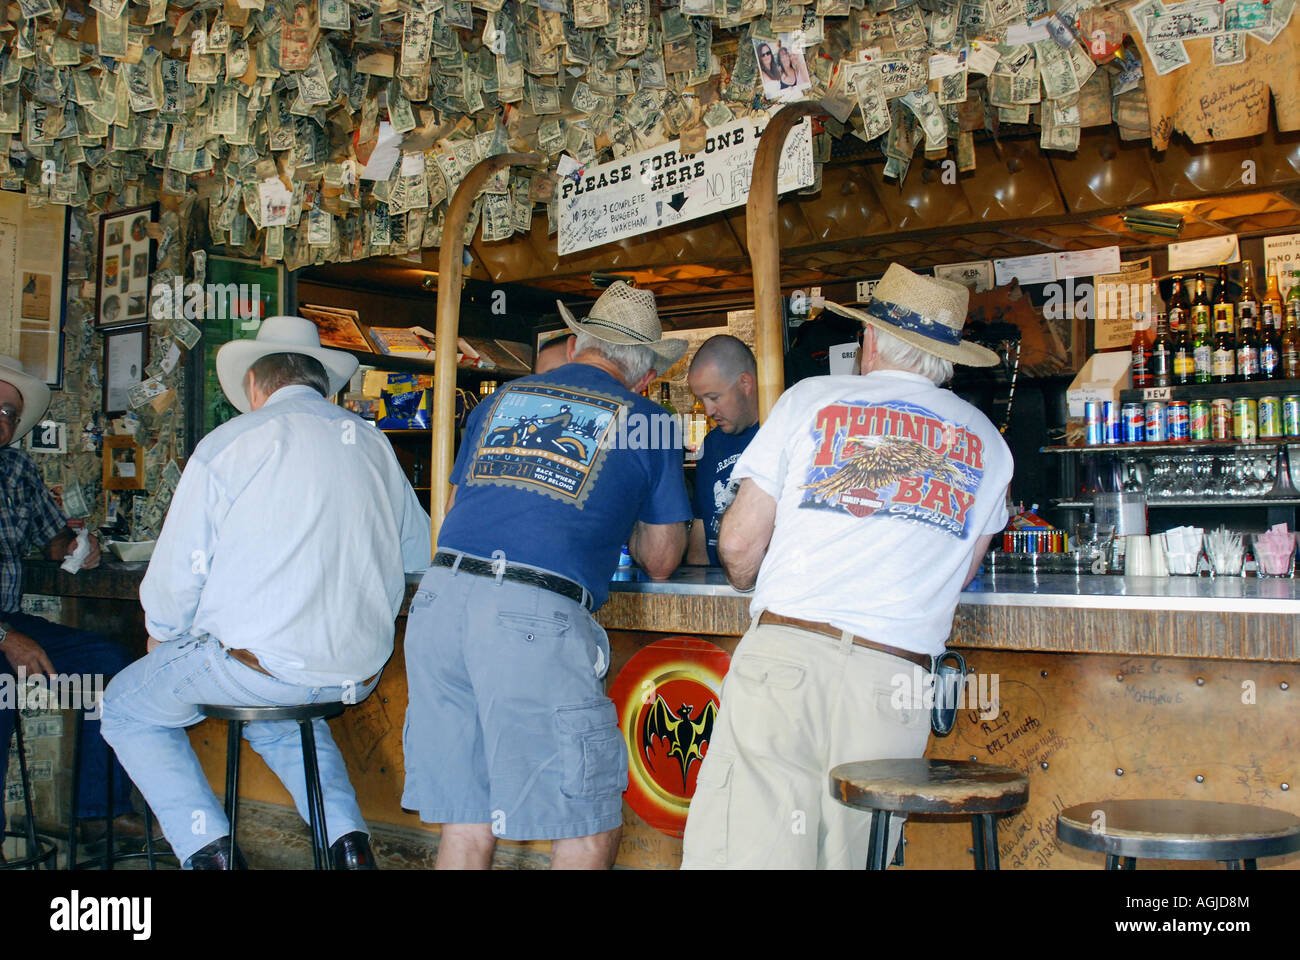 Painet jm7497 arizona scottsdale reata pass greasewood flat outdoor dining  bar eatery currencycovered ceiling affairs Stock Photo - Alamy